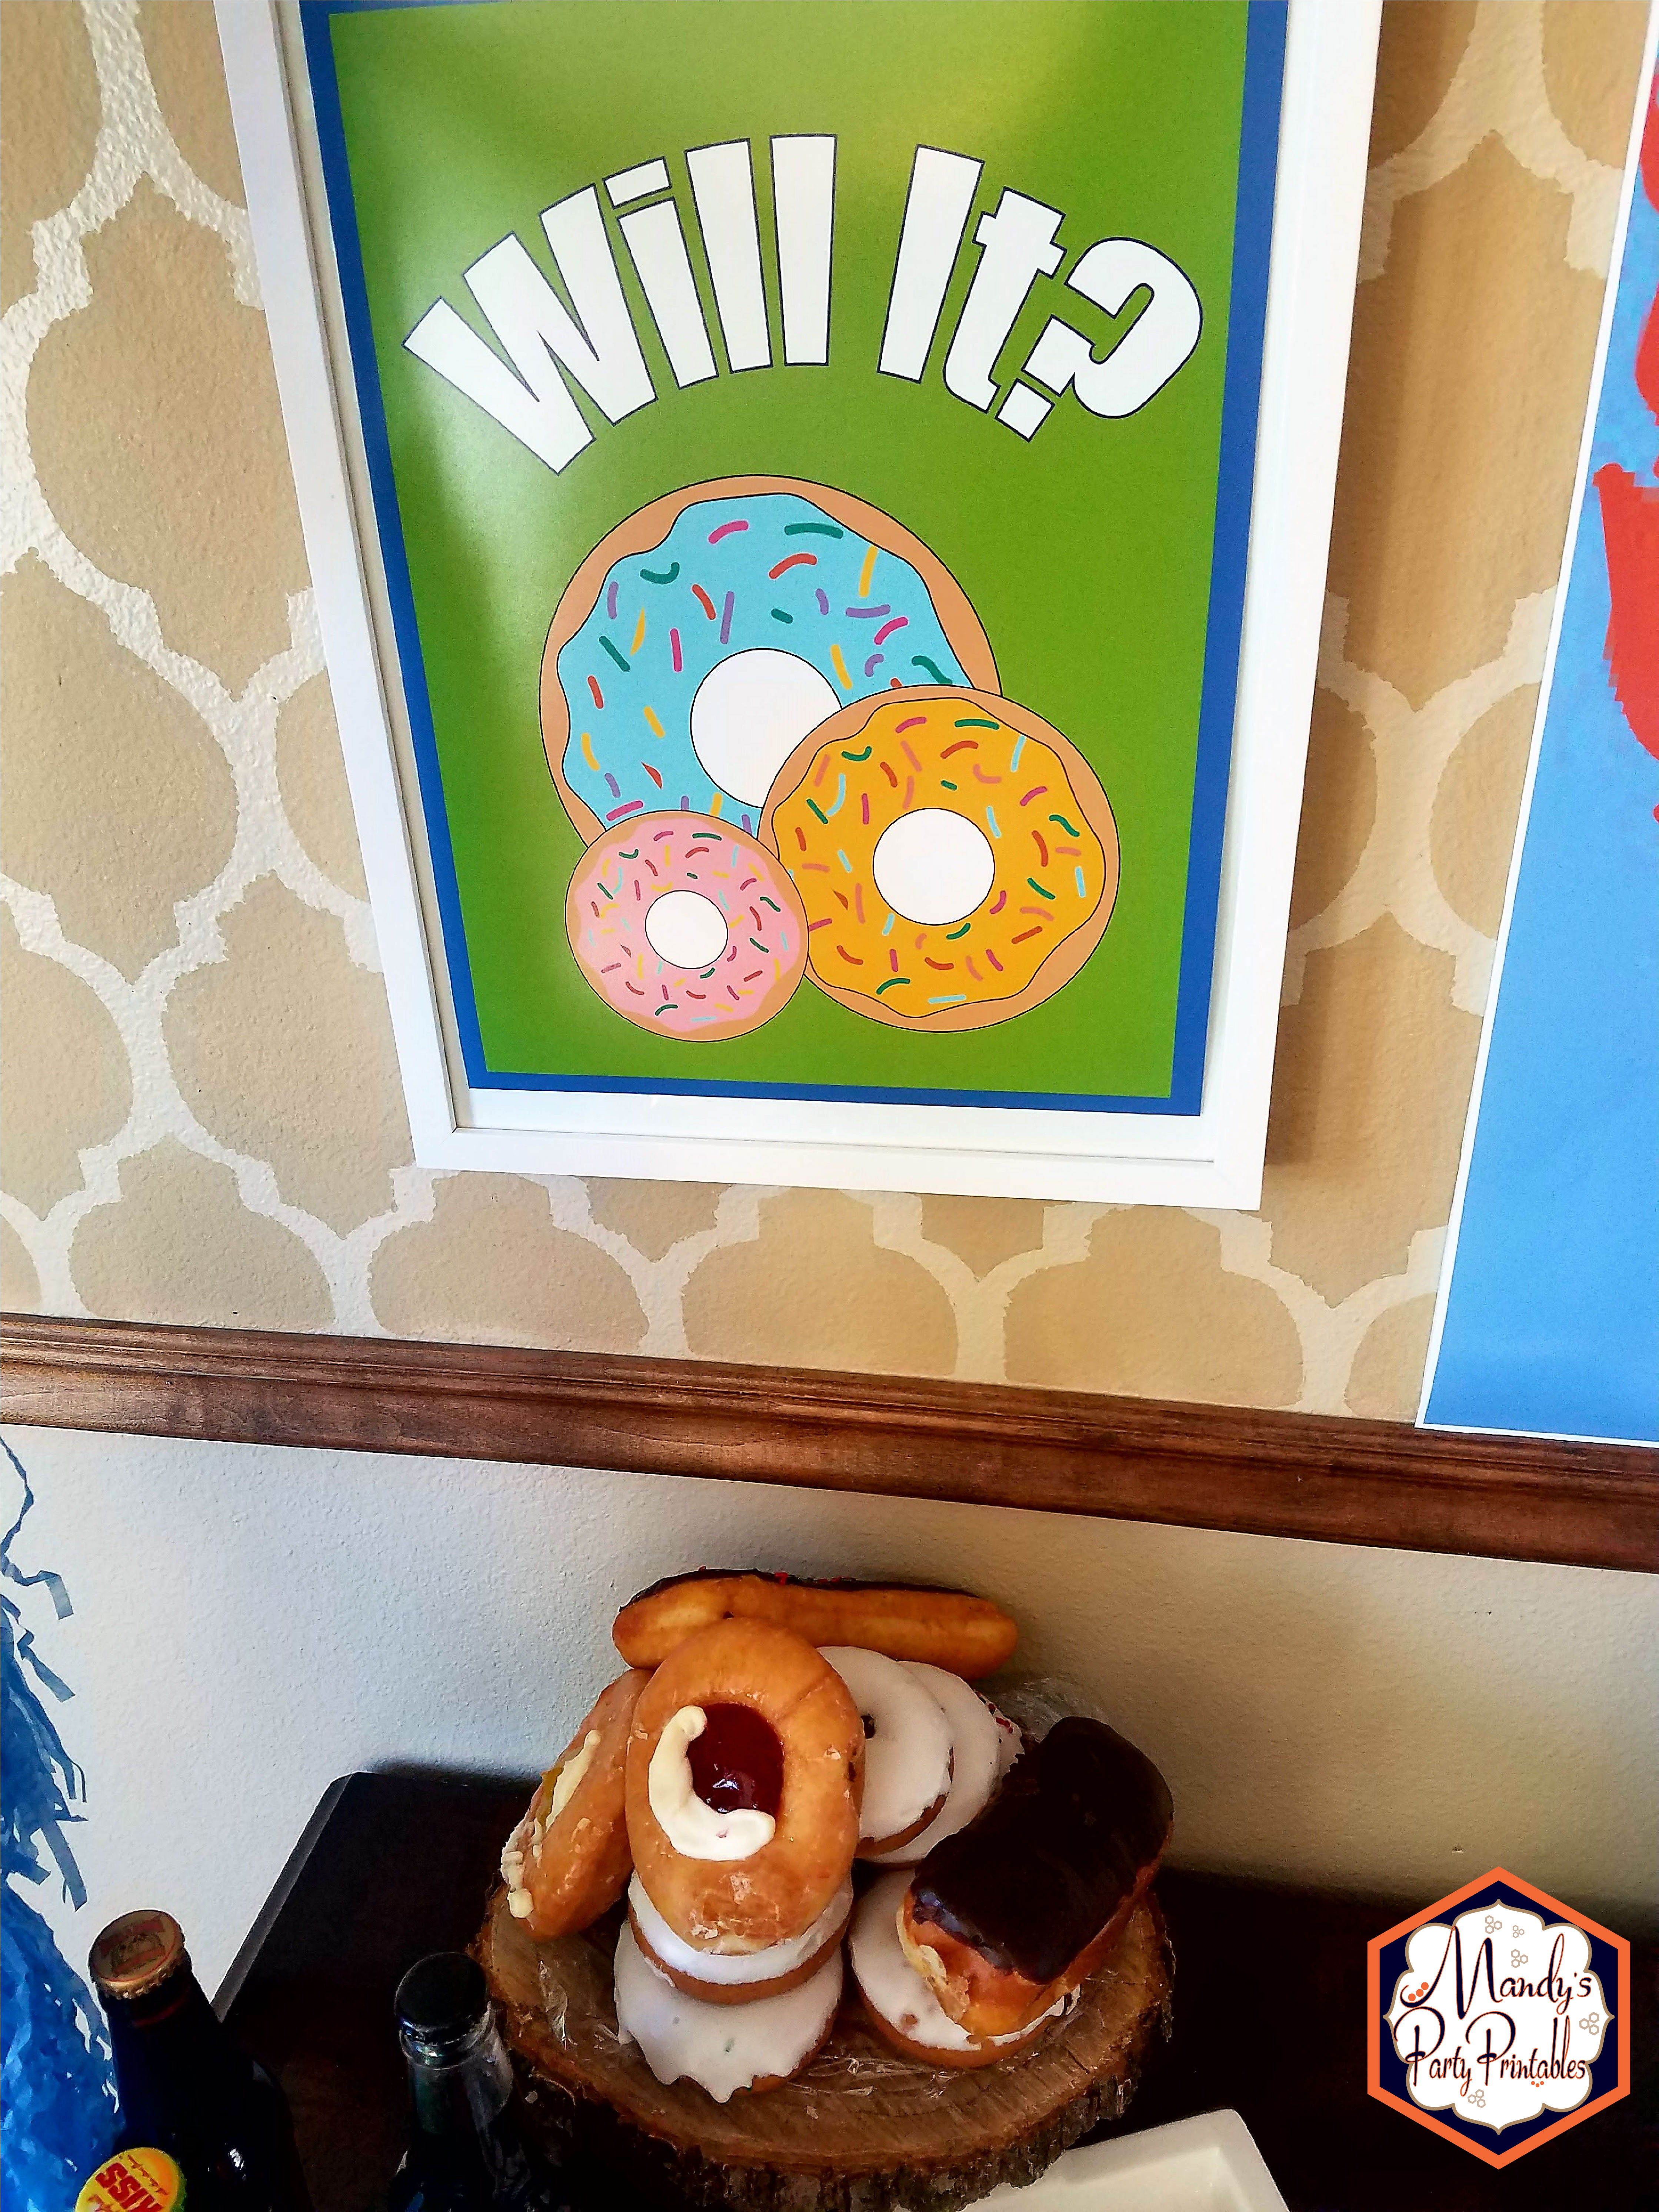 Will it Donut sign from Good Mythical Morning Inspired Birthday Party via Mandy's Party Printables